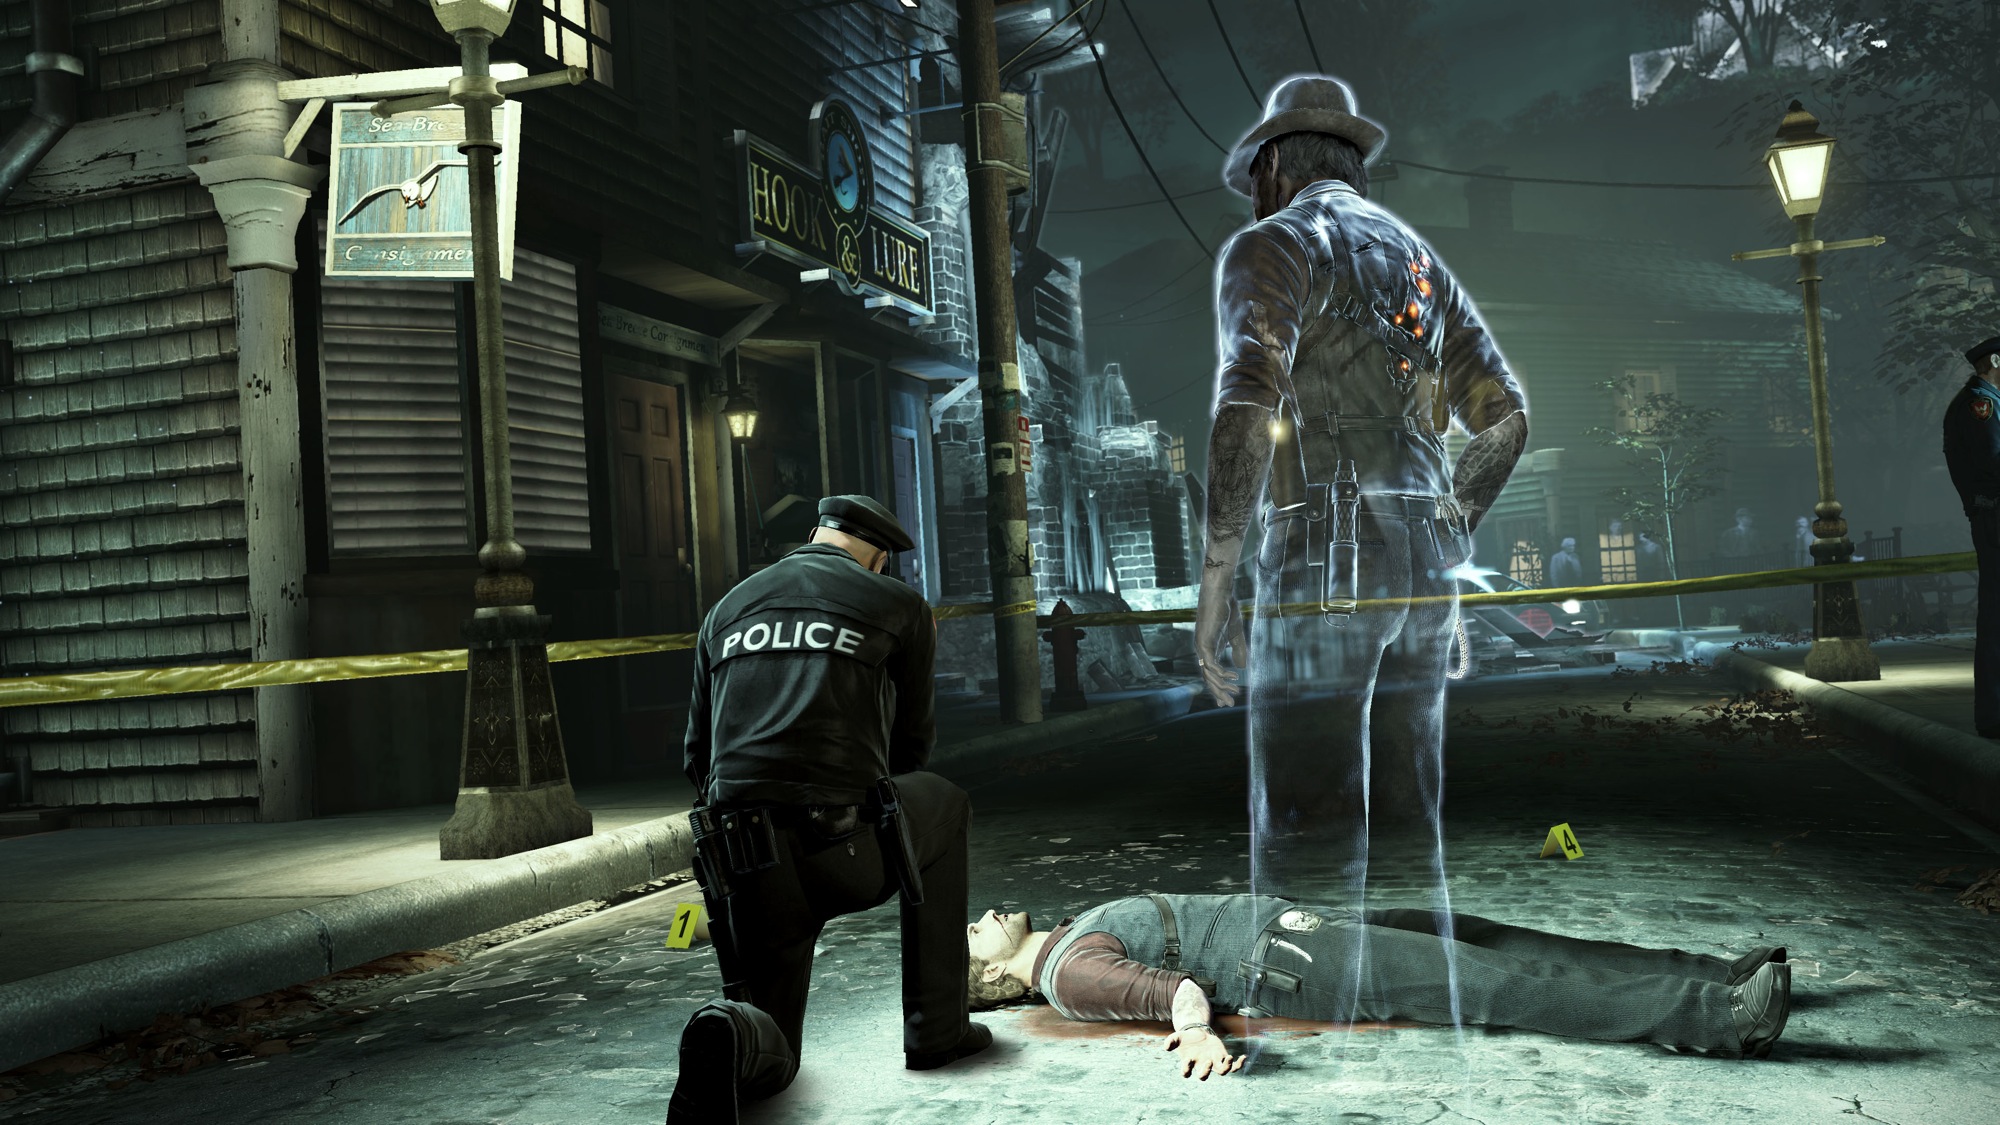 Murdered: Soul Suspect Backgrounds, Compatible - PC, Mobile, Gadgets| 2000x1125 px